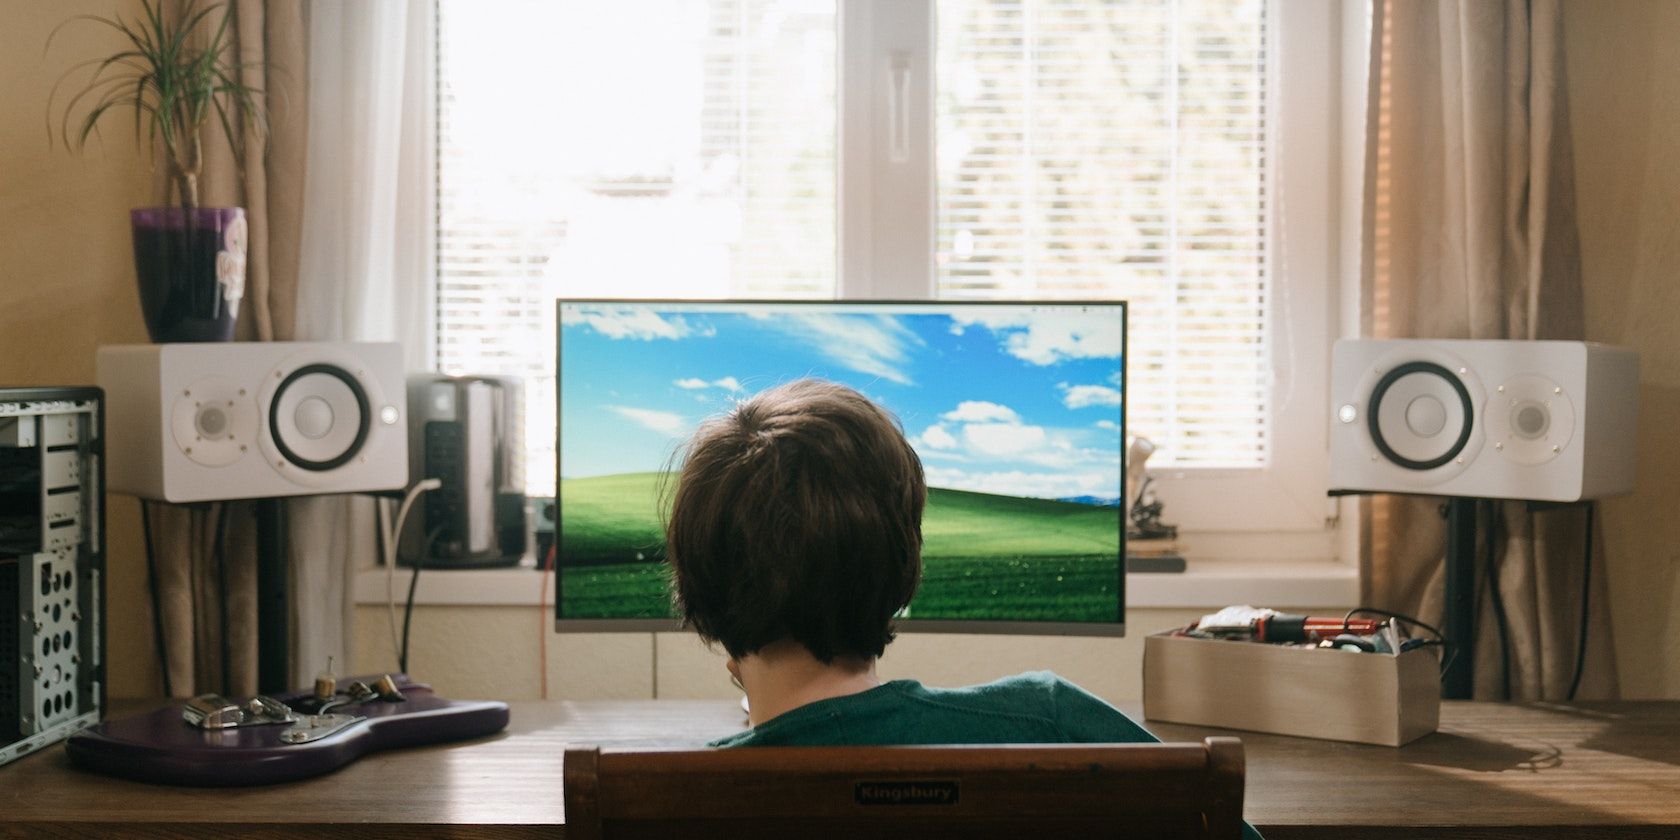 Boy in Red Shirt Sitting on Chair in Front of Computer Screen